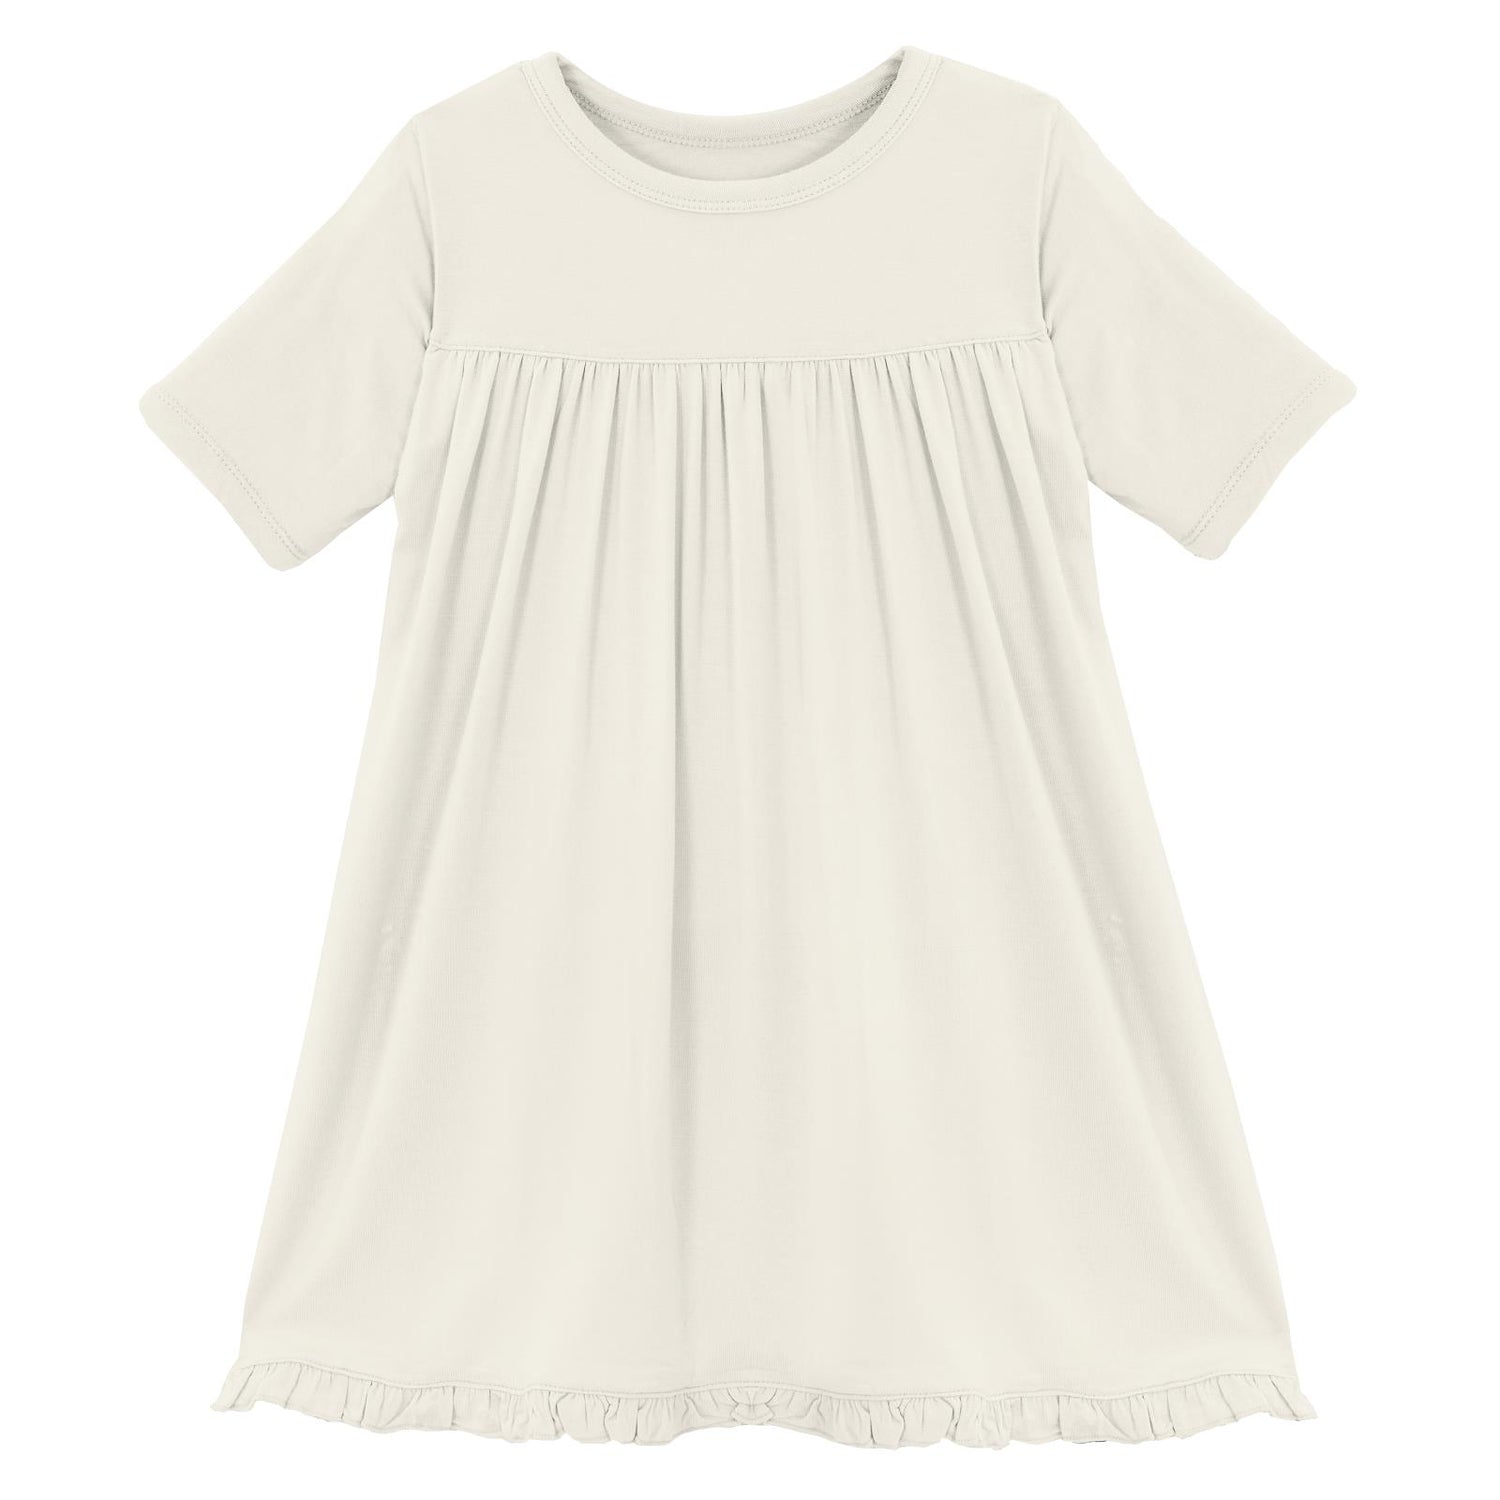 Classic Short Sleeve Swing Dress in Natural